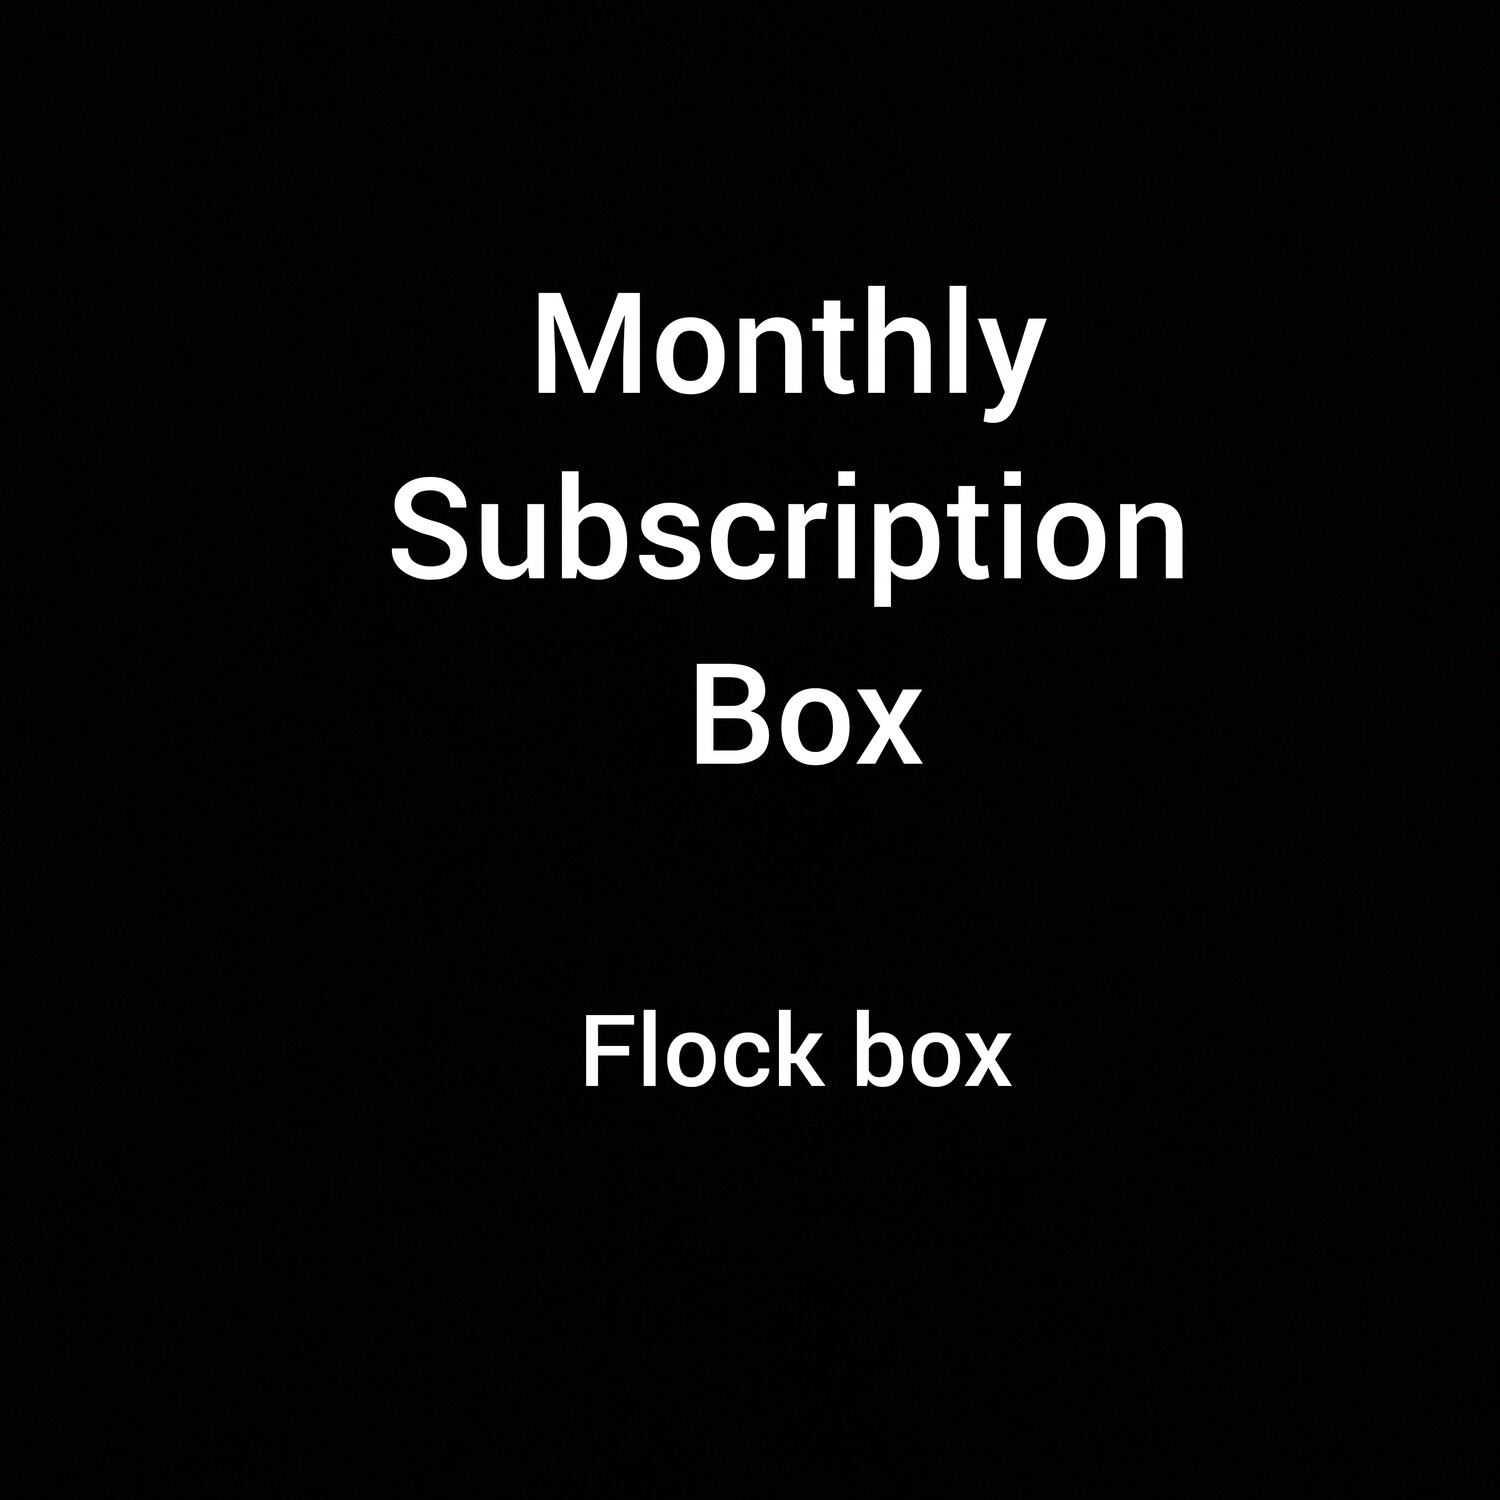 Flock Box Monthly subscription